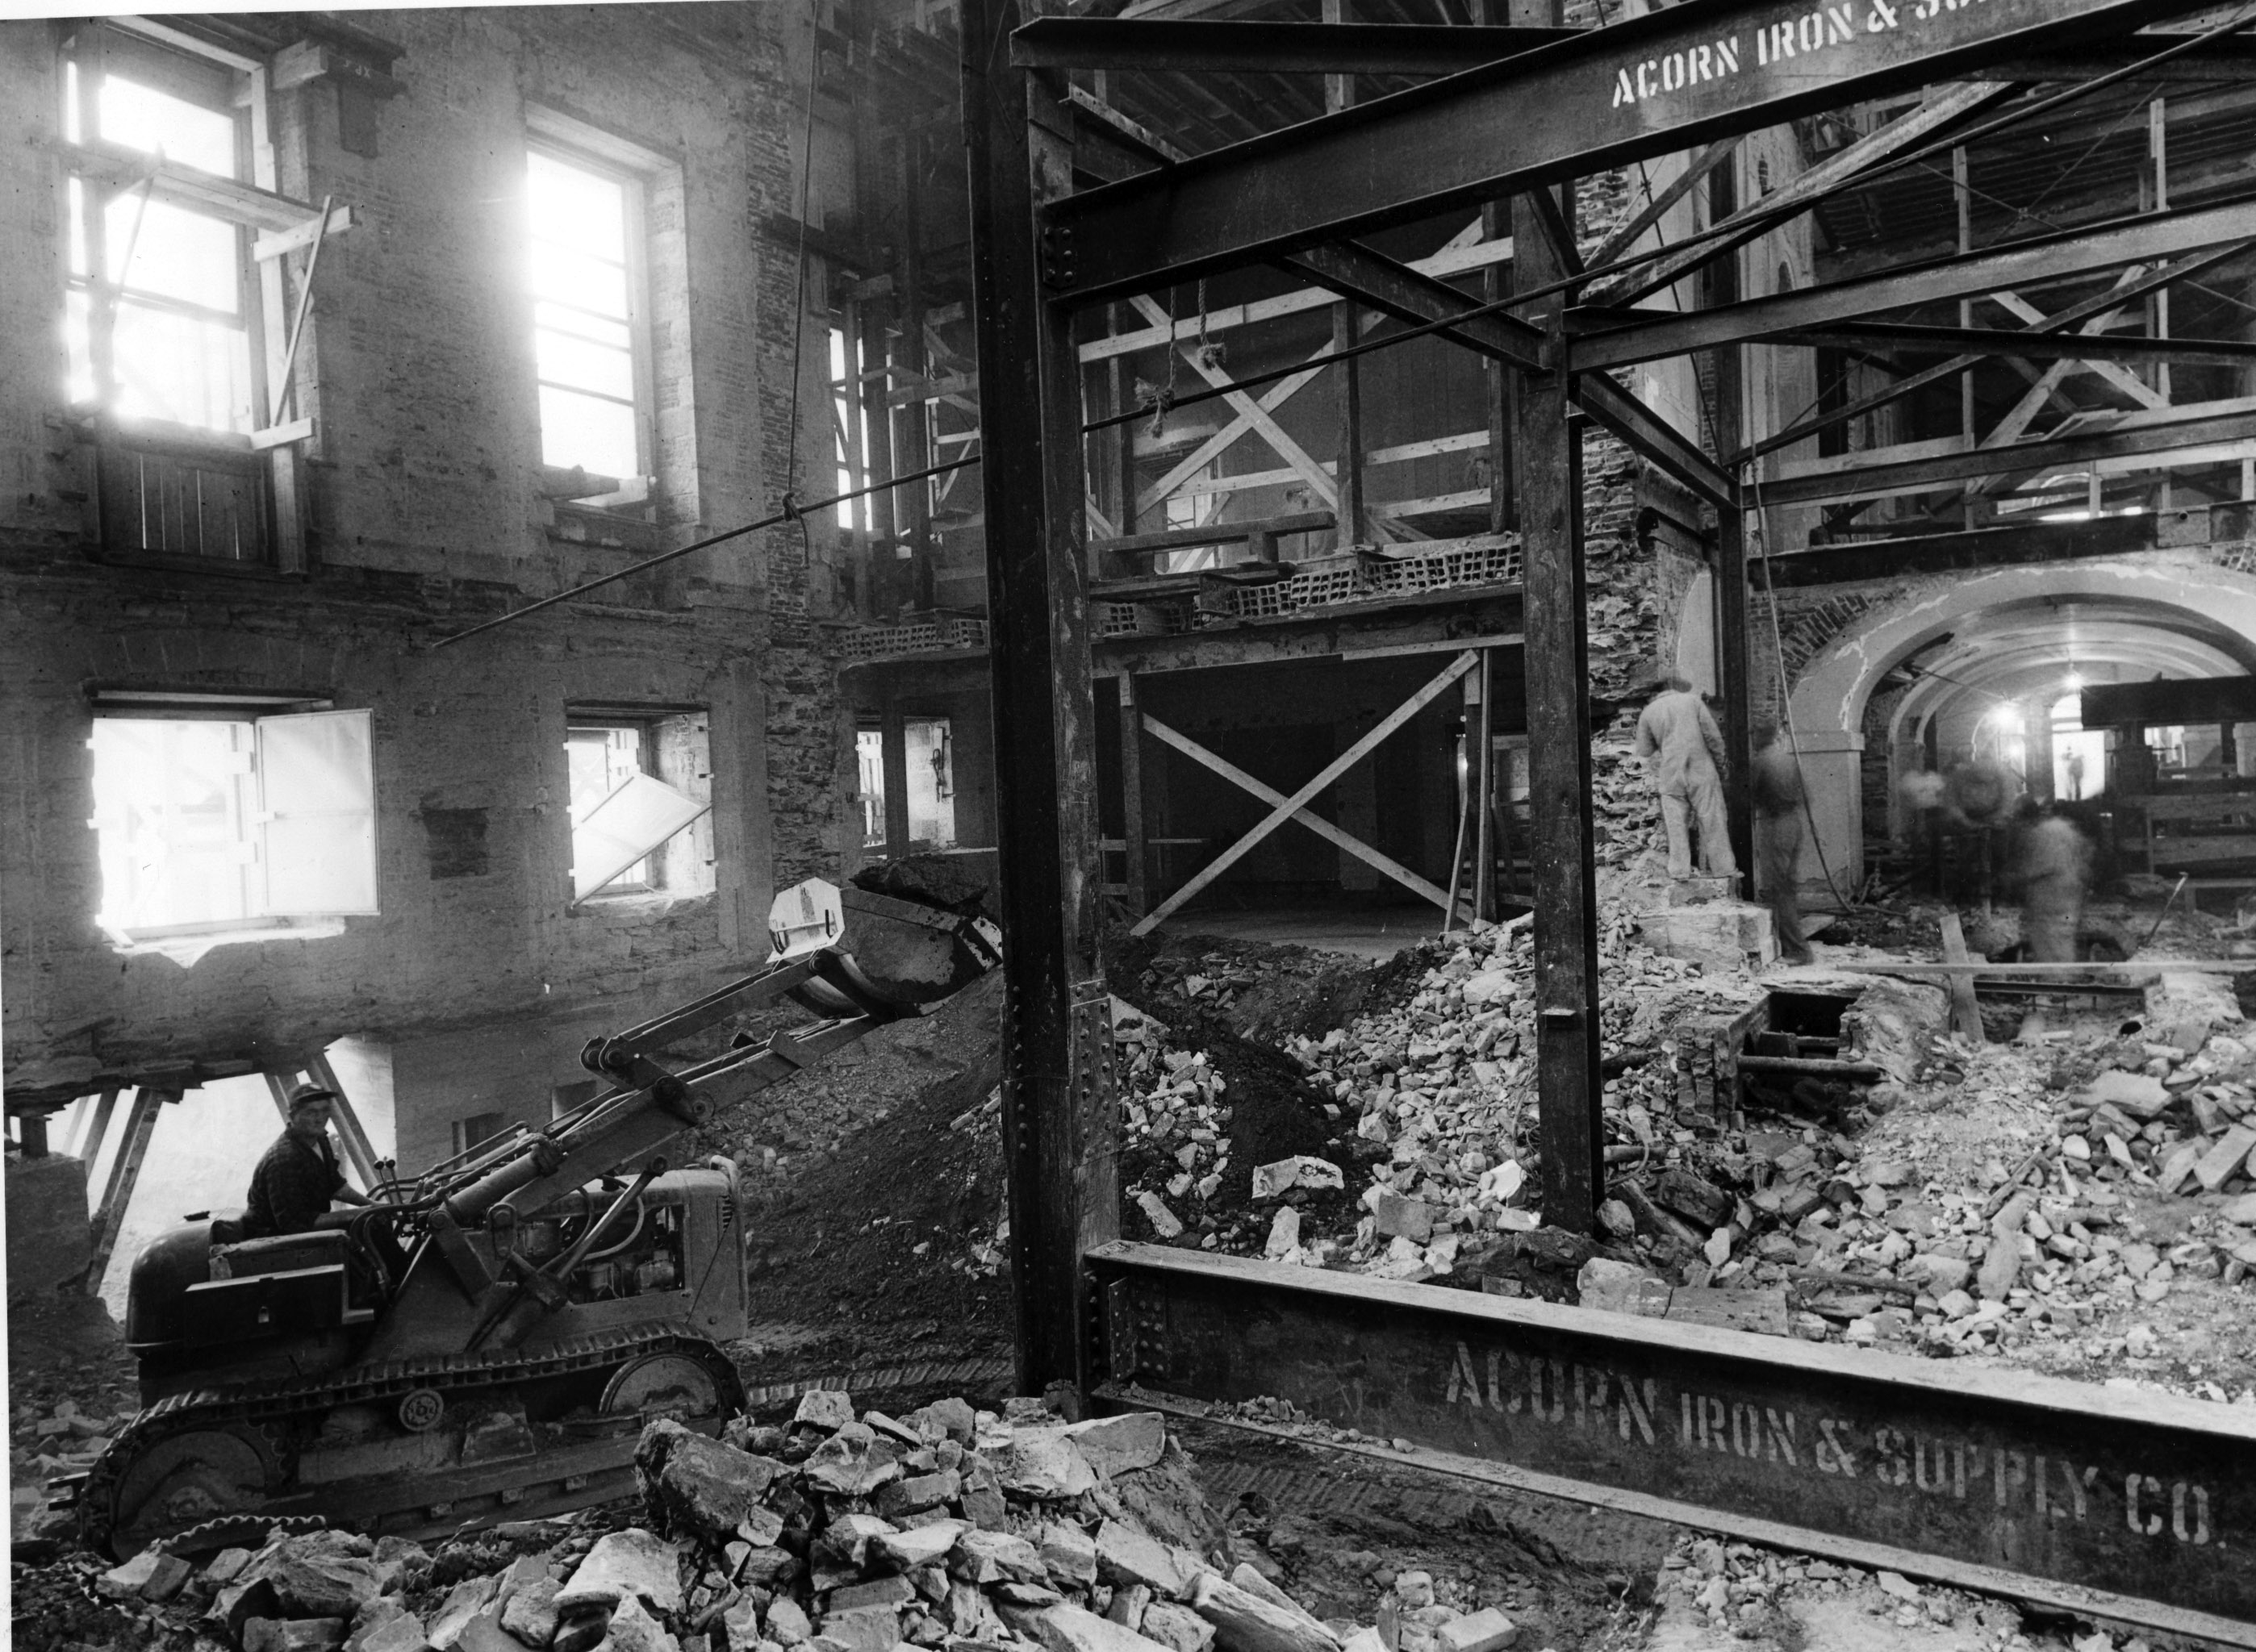 Construction equipment inside the White House during a major renovation, Washington, United States, circa 1950